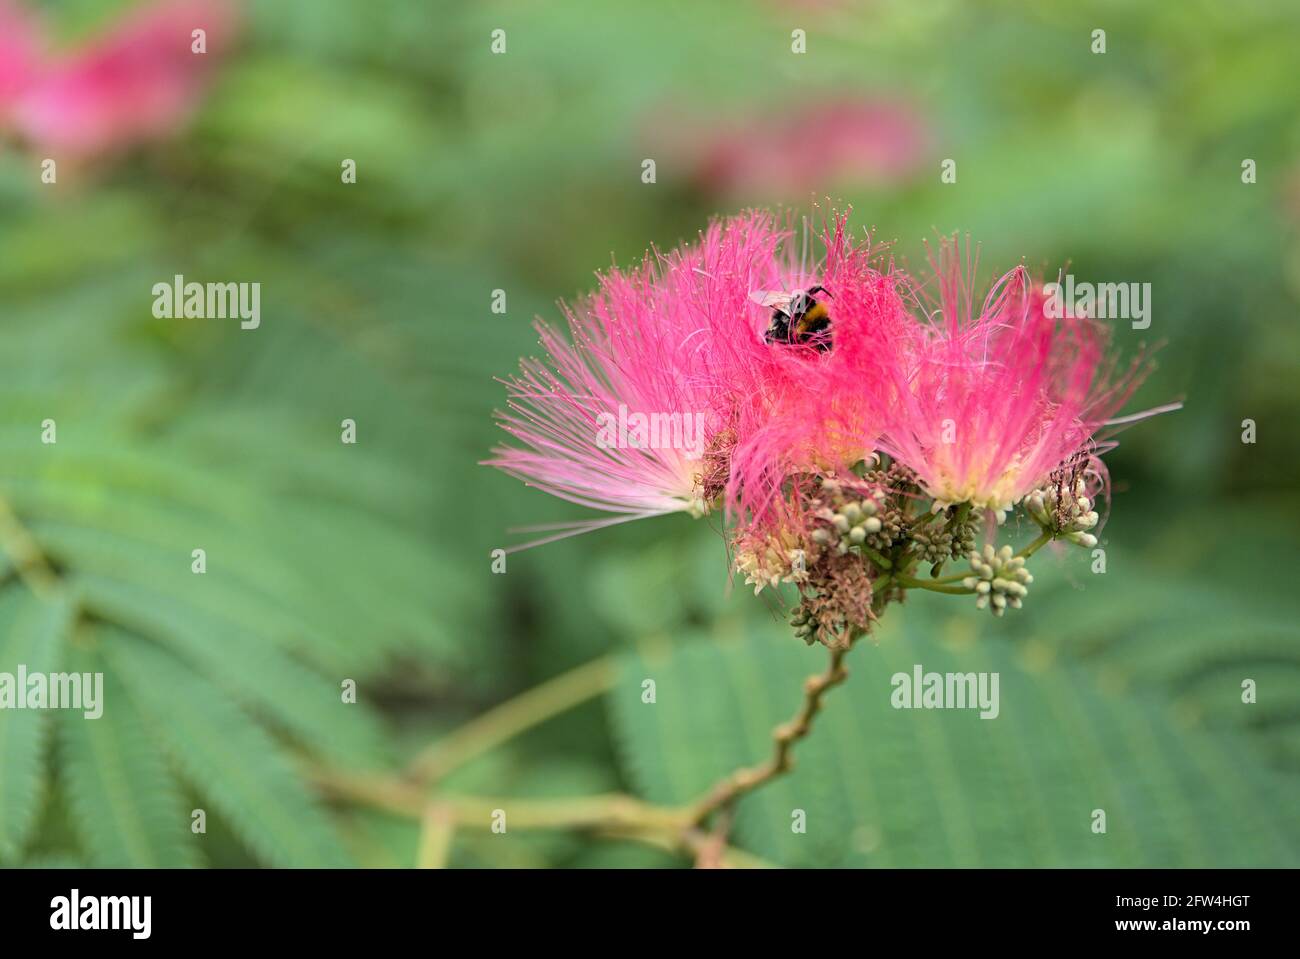 Bumblebee polinating of flowers of Albizia (Albisia) julibrissin, Paraserianthes lophantha Stock Photo